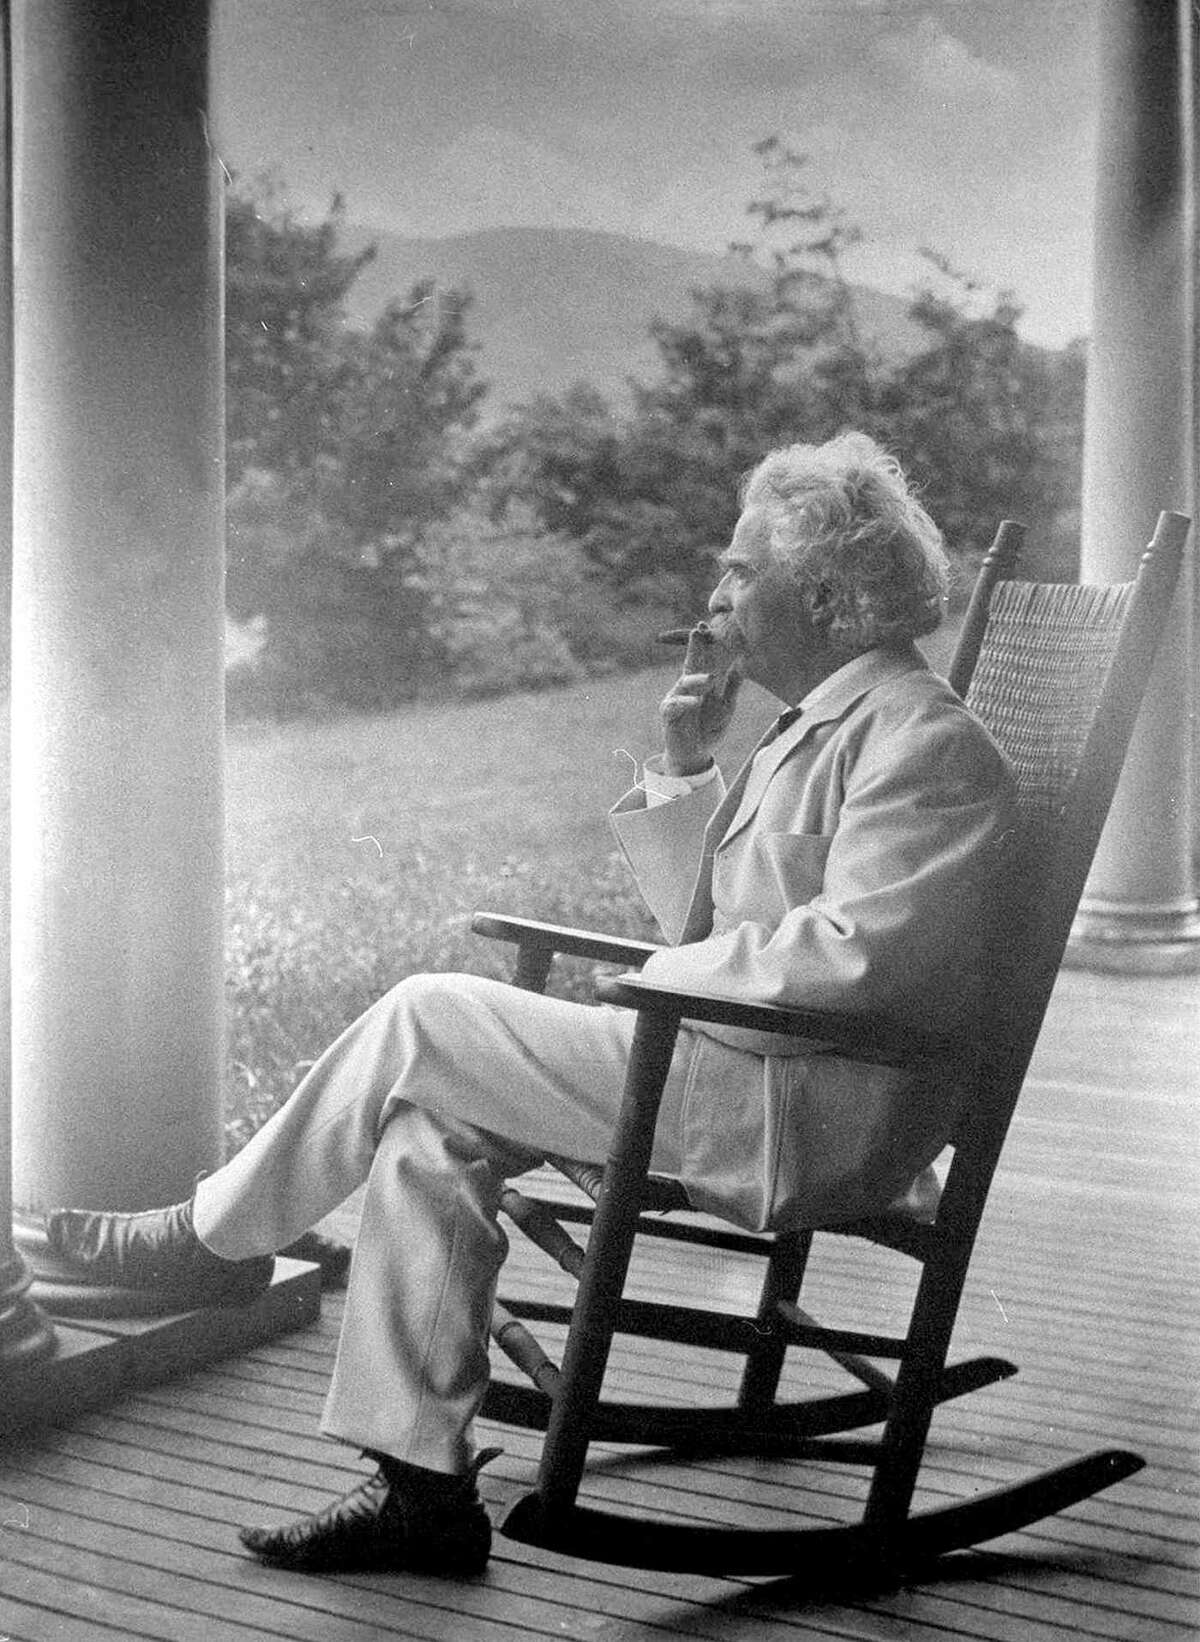 Mark Twain photo at the Redding Library named after him